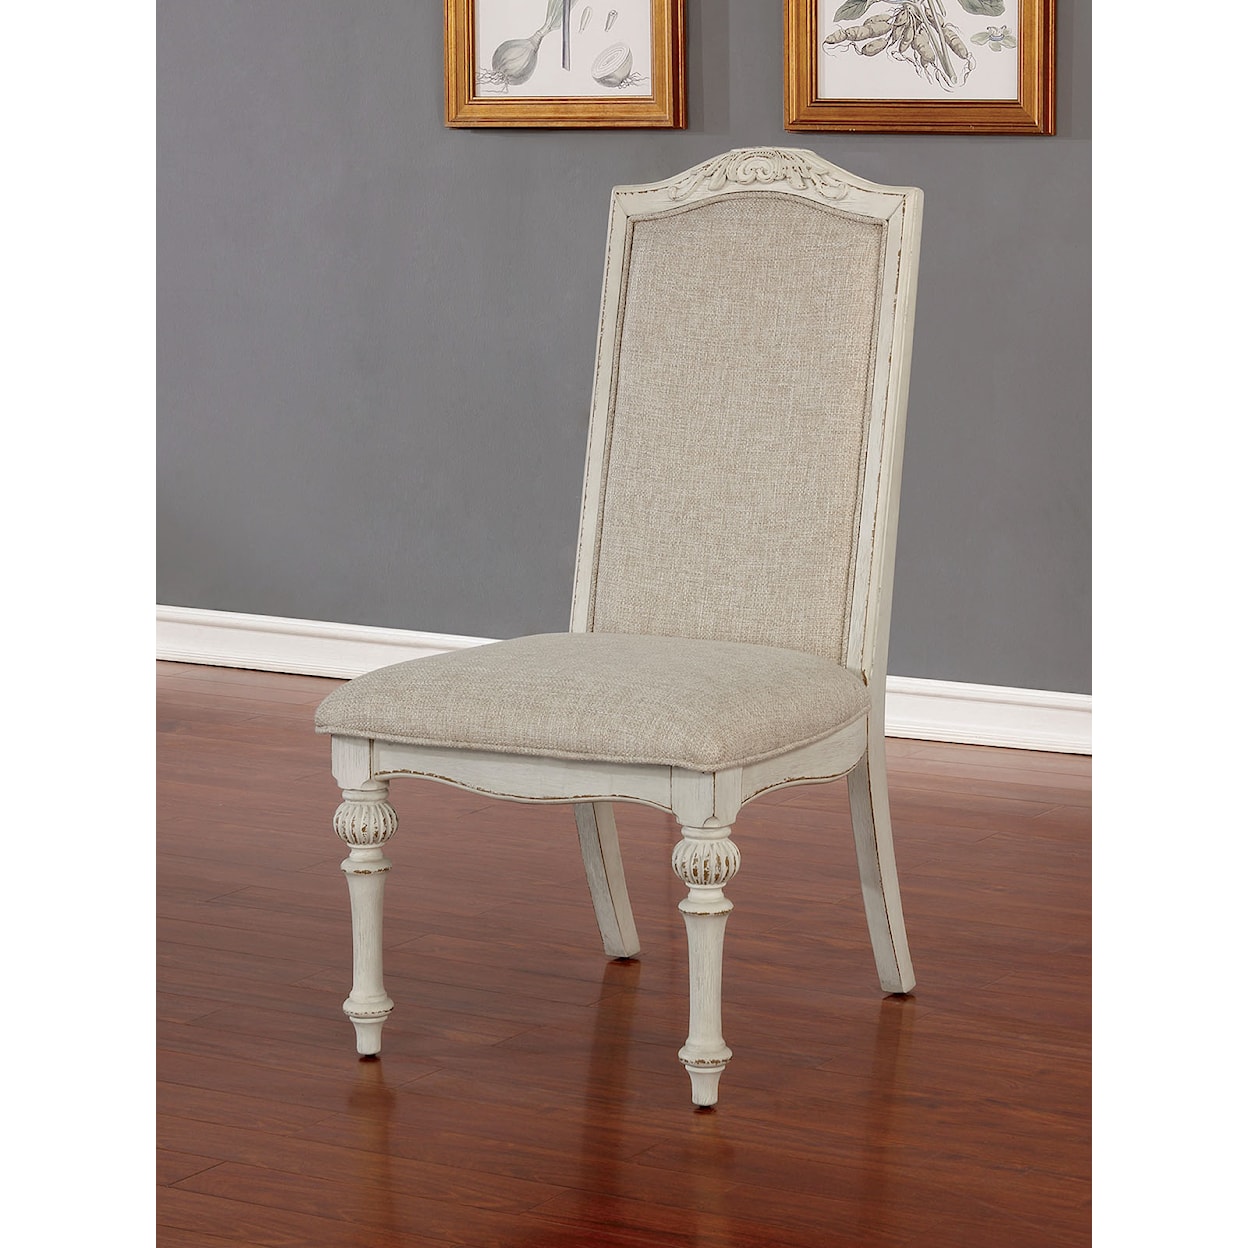 Furniture of America Arcadia Two-Piece Side Chair Set